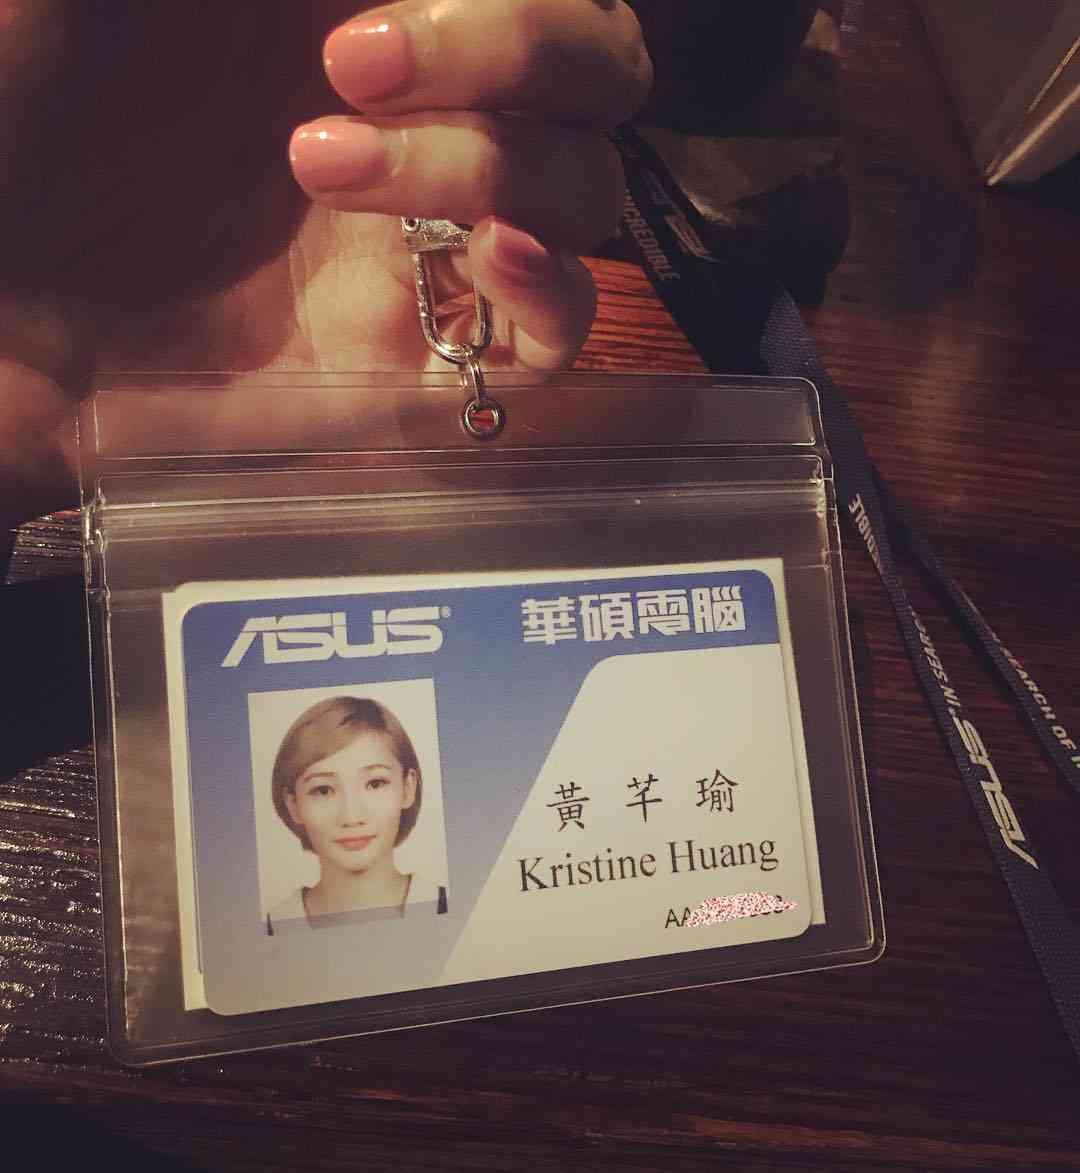 Kristine Huang with her ASUS staff badge